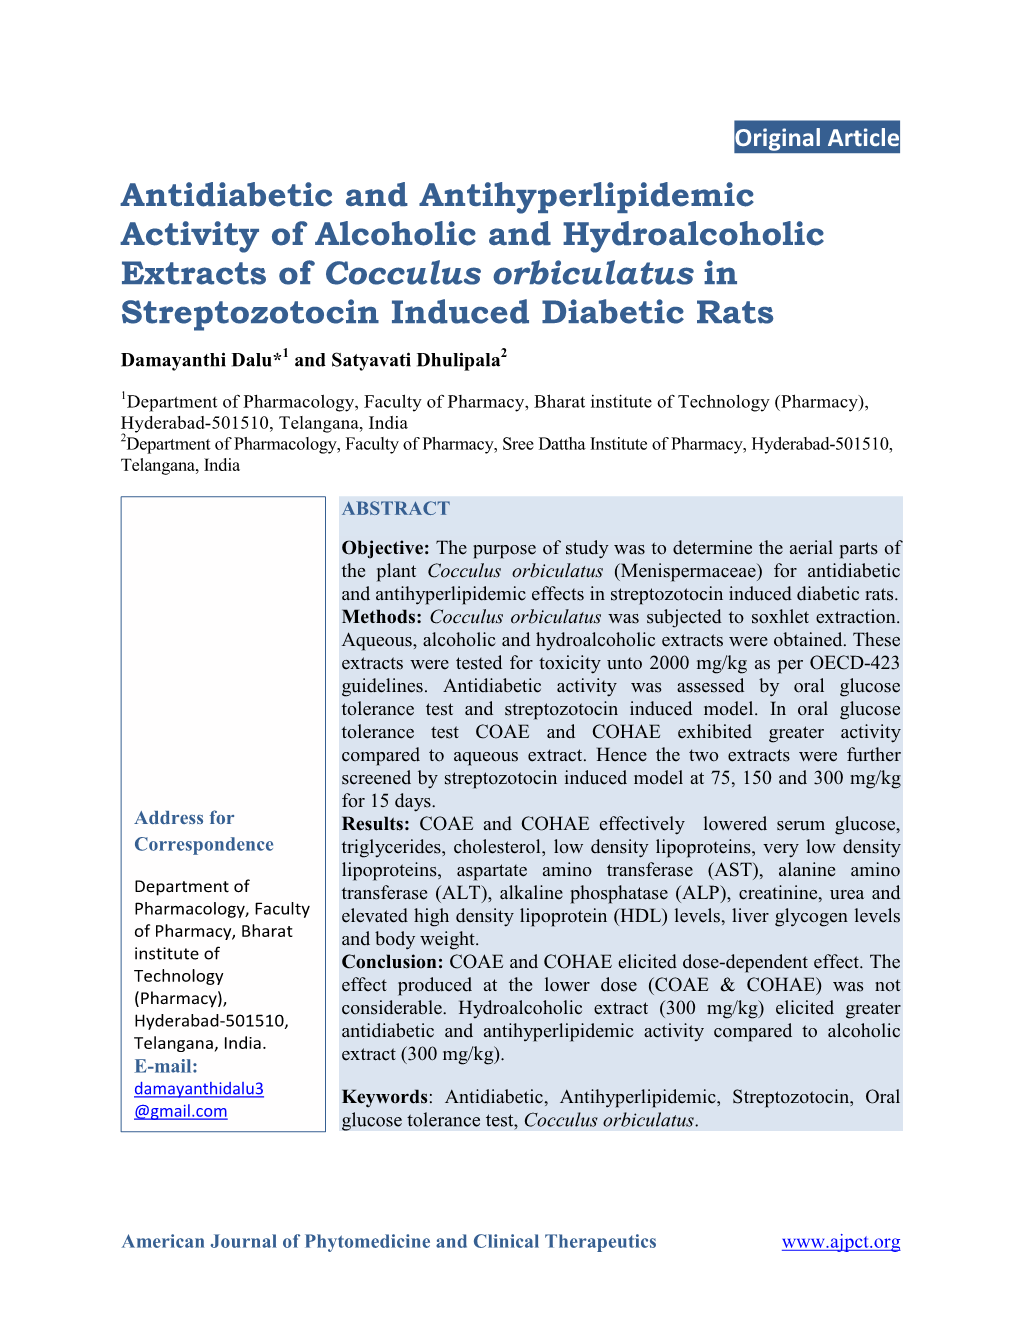 Antidiabetic and Antihyperlipidemic Activity of Alcoholic and Hydroalcoholic Extracts of Cocculus Orbiculatus in Streptozotocin